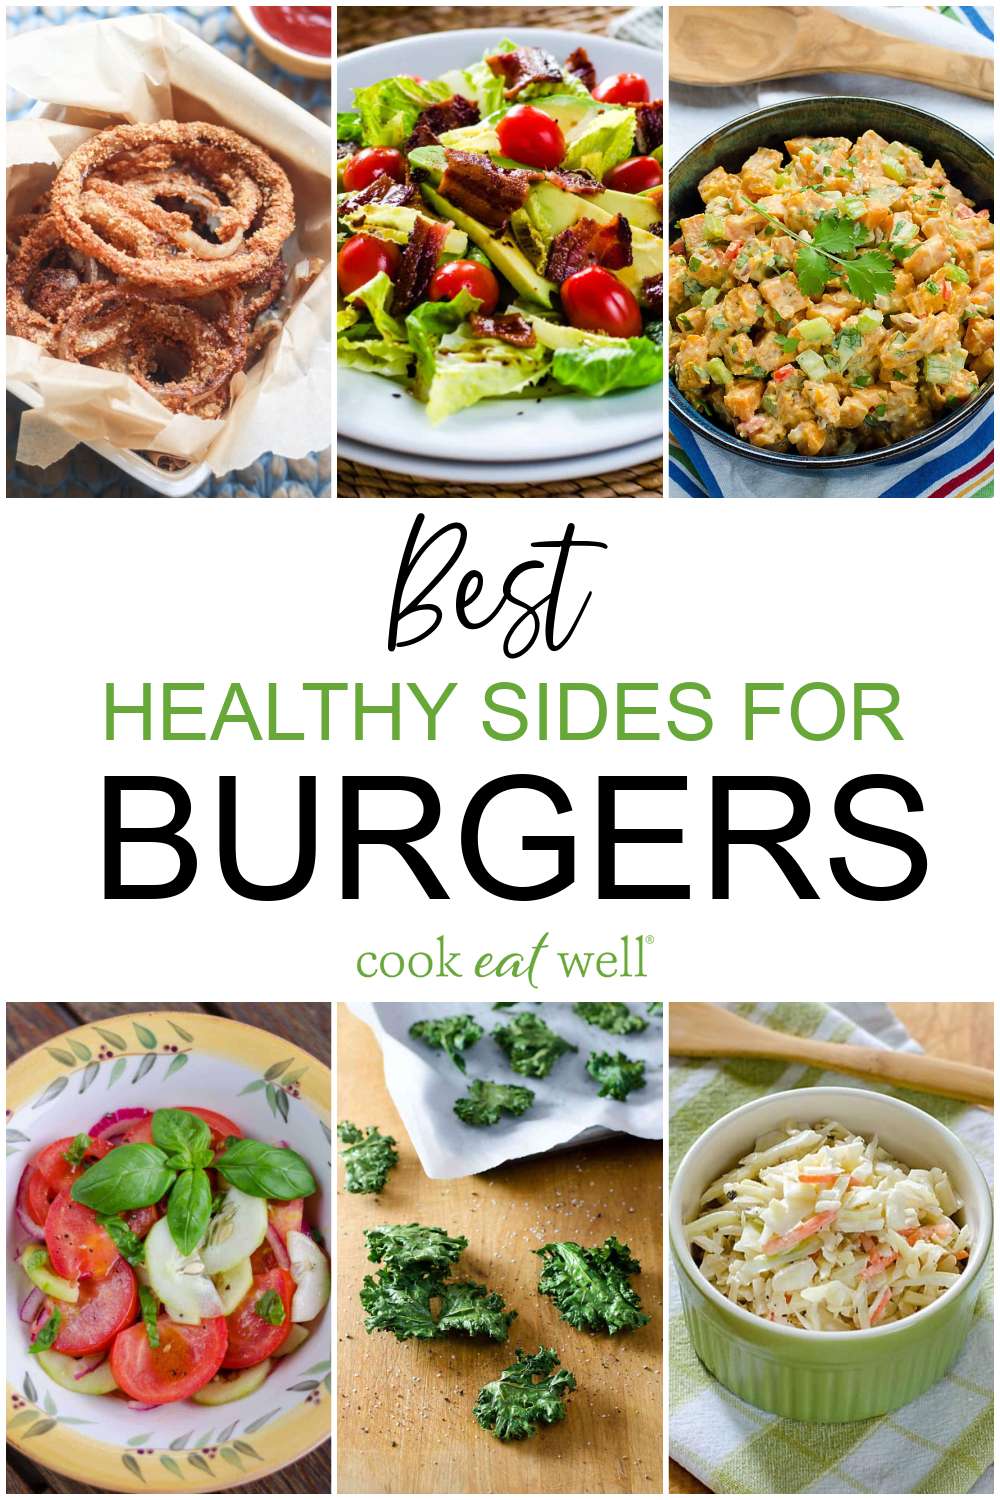 Best healthy sides for burgers
